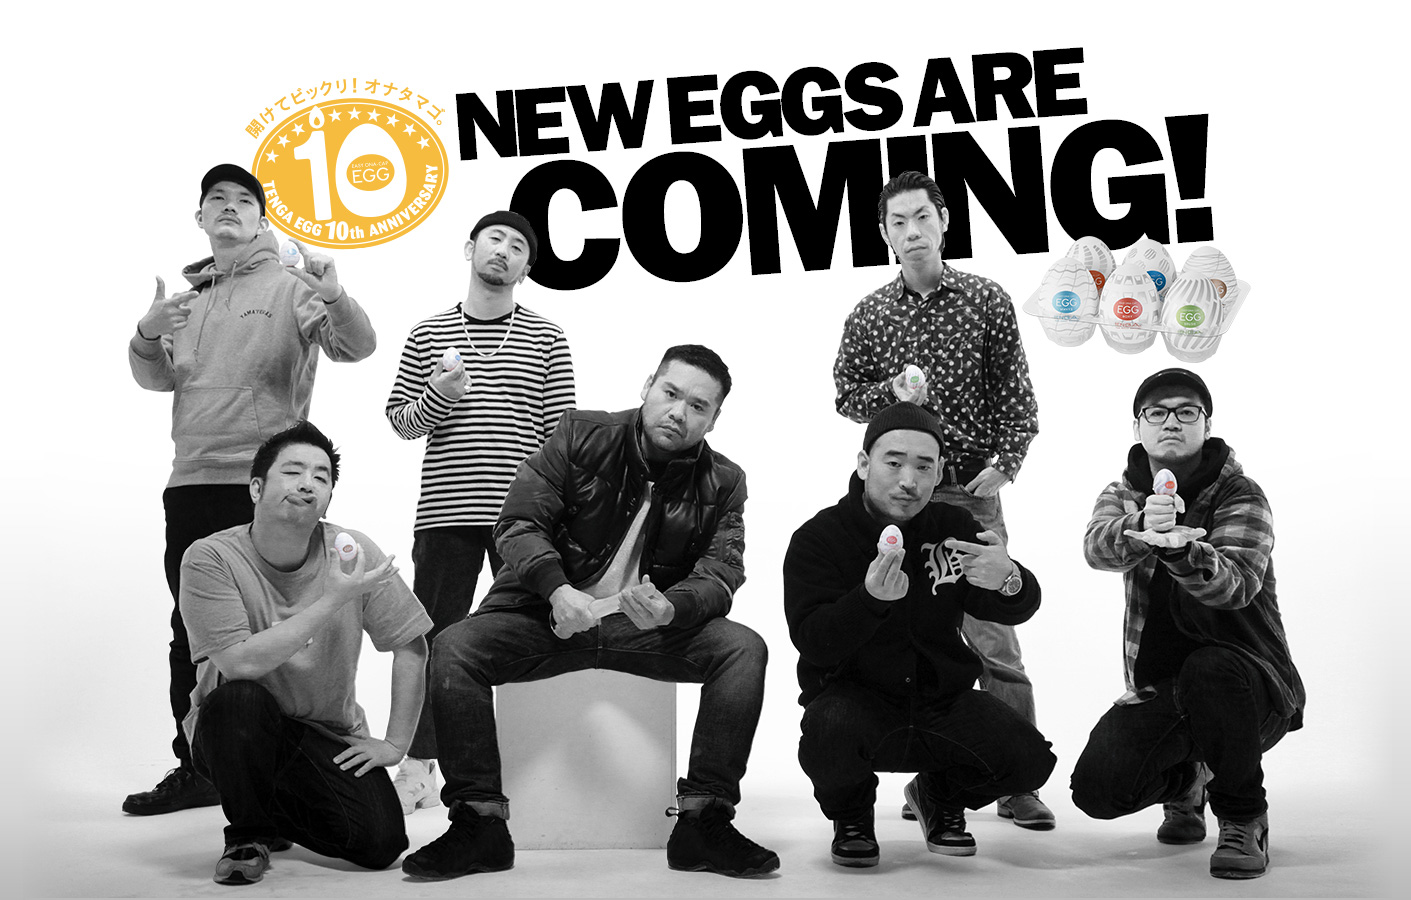 NEW EGGS ARE COMING! テンガエッグ10周年